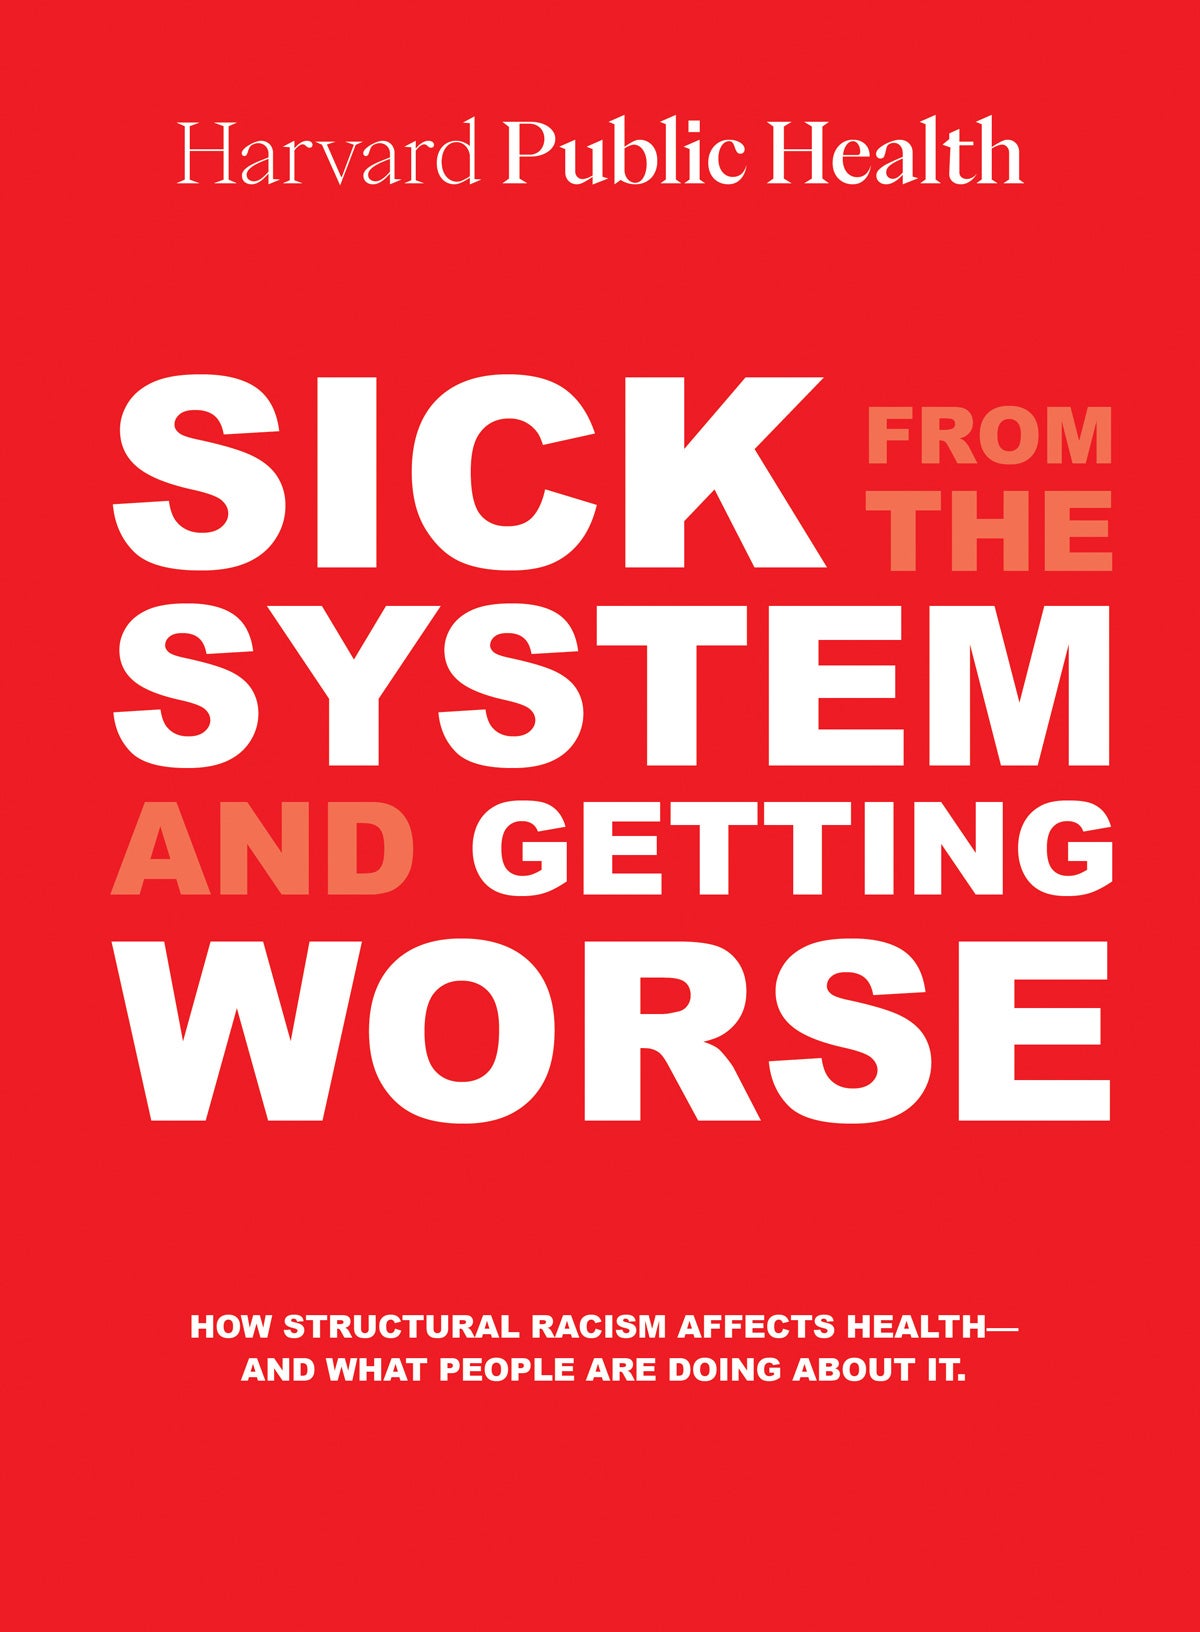 Magazine Cover: Harvard Public Health (magazine name). Headline reads: Sick from the system and getting worse" in white text on a bright red background. Subhead reads:How structural racism affects health—and what people are doing about it.